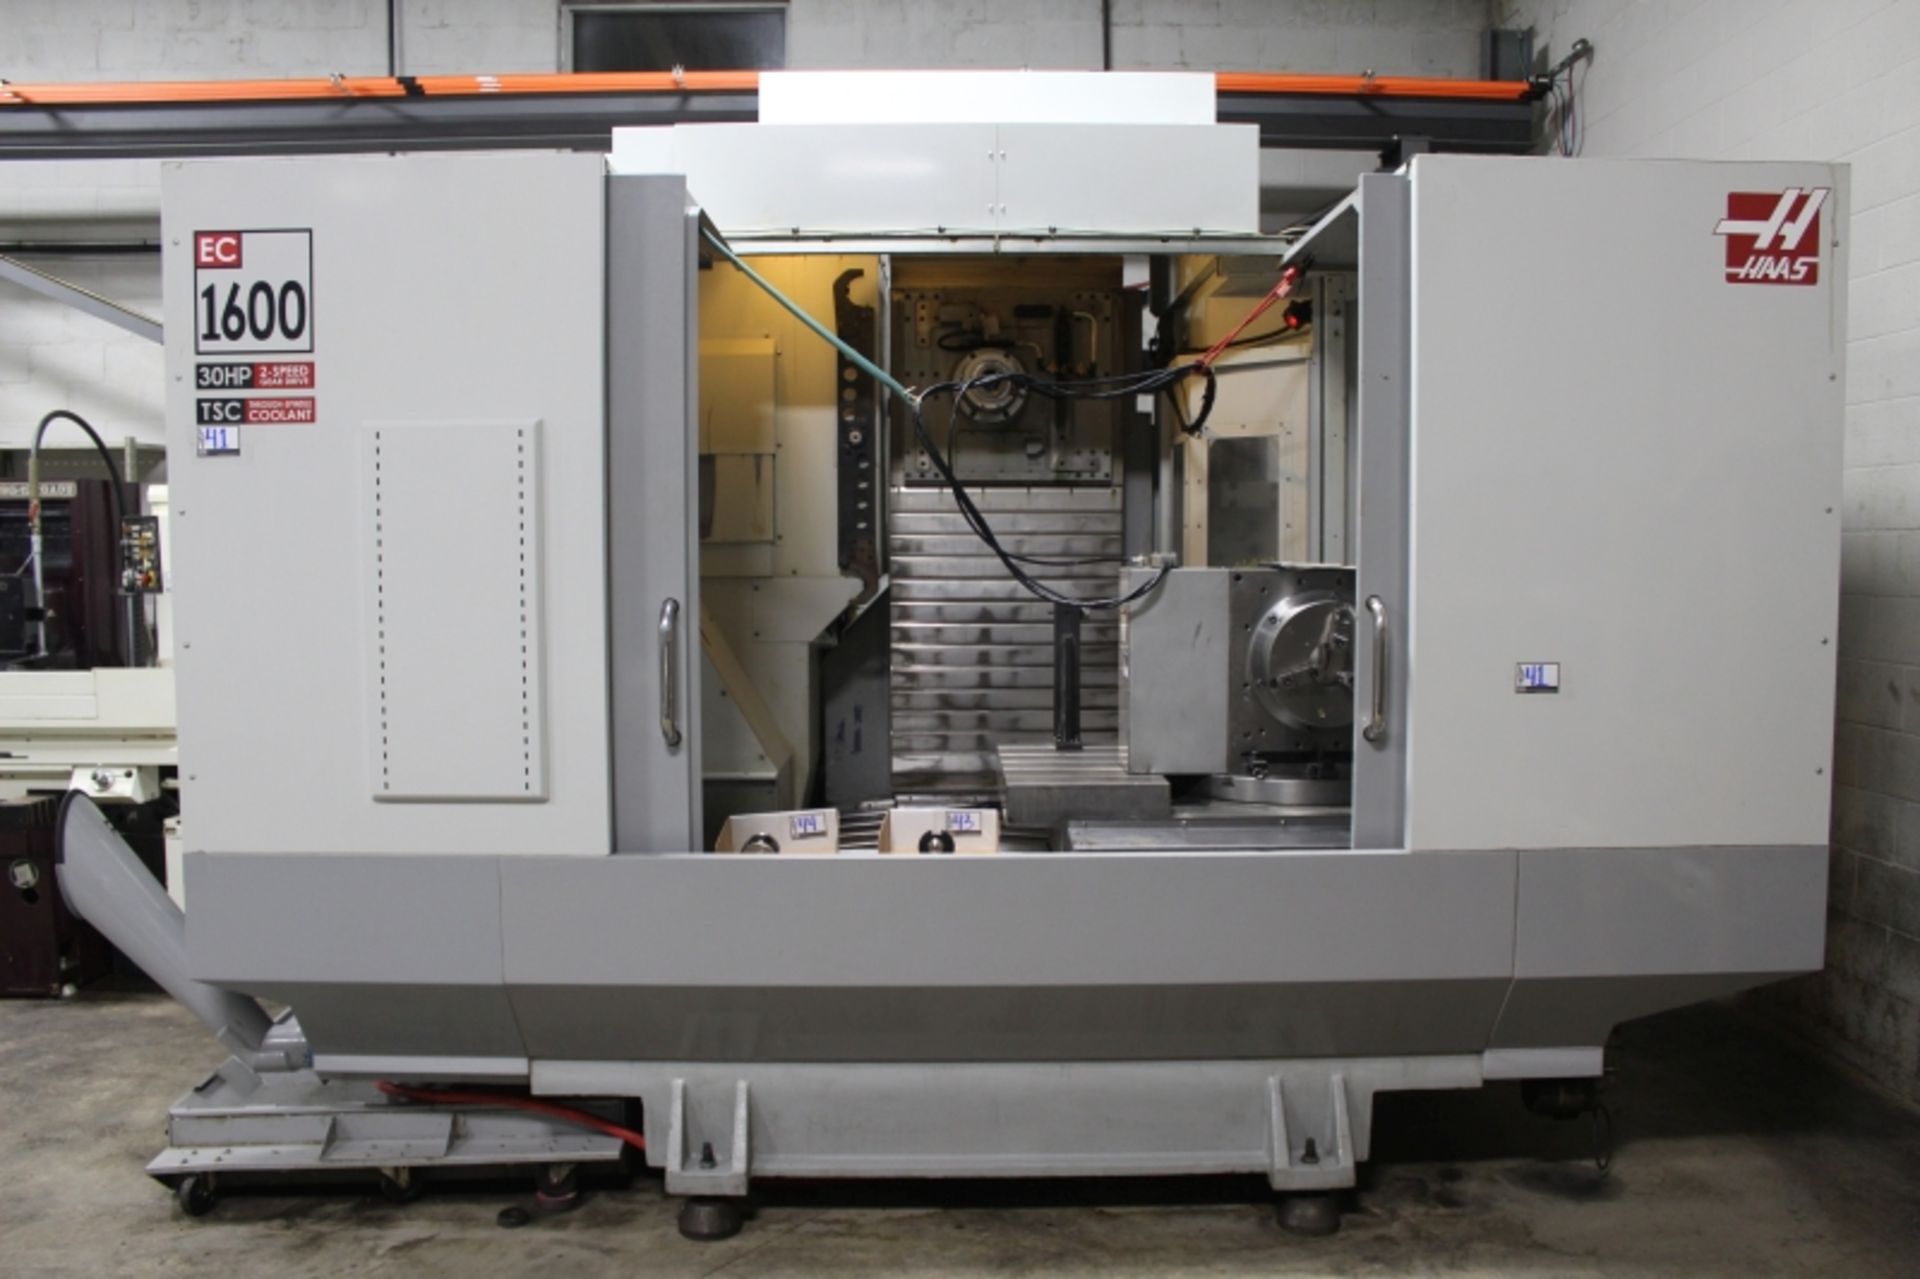 Haas EC-1600-4X, 5-Axis, 64” x 50” x 32” trvls, 7500 RPM, CT50, 30 ATC, CTS, S/N 2052737, New - Image 6 of 13